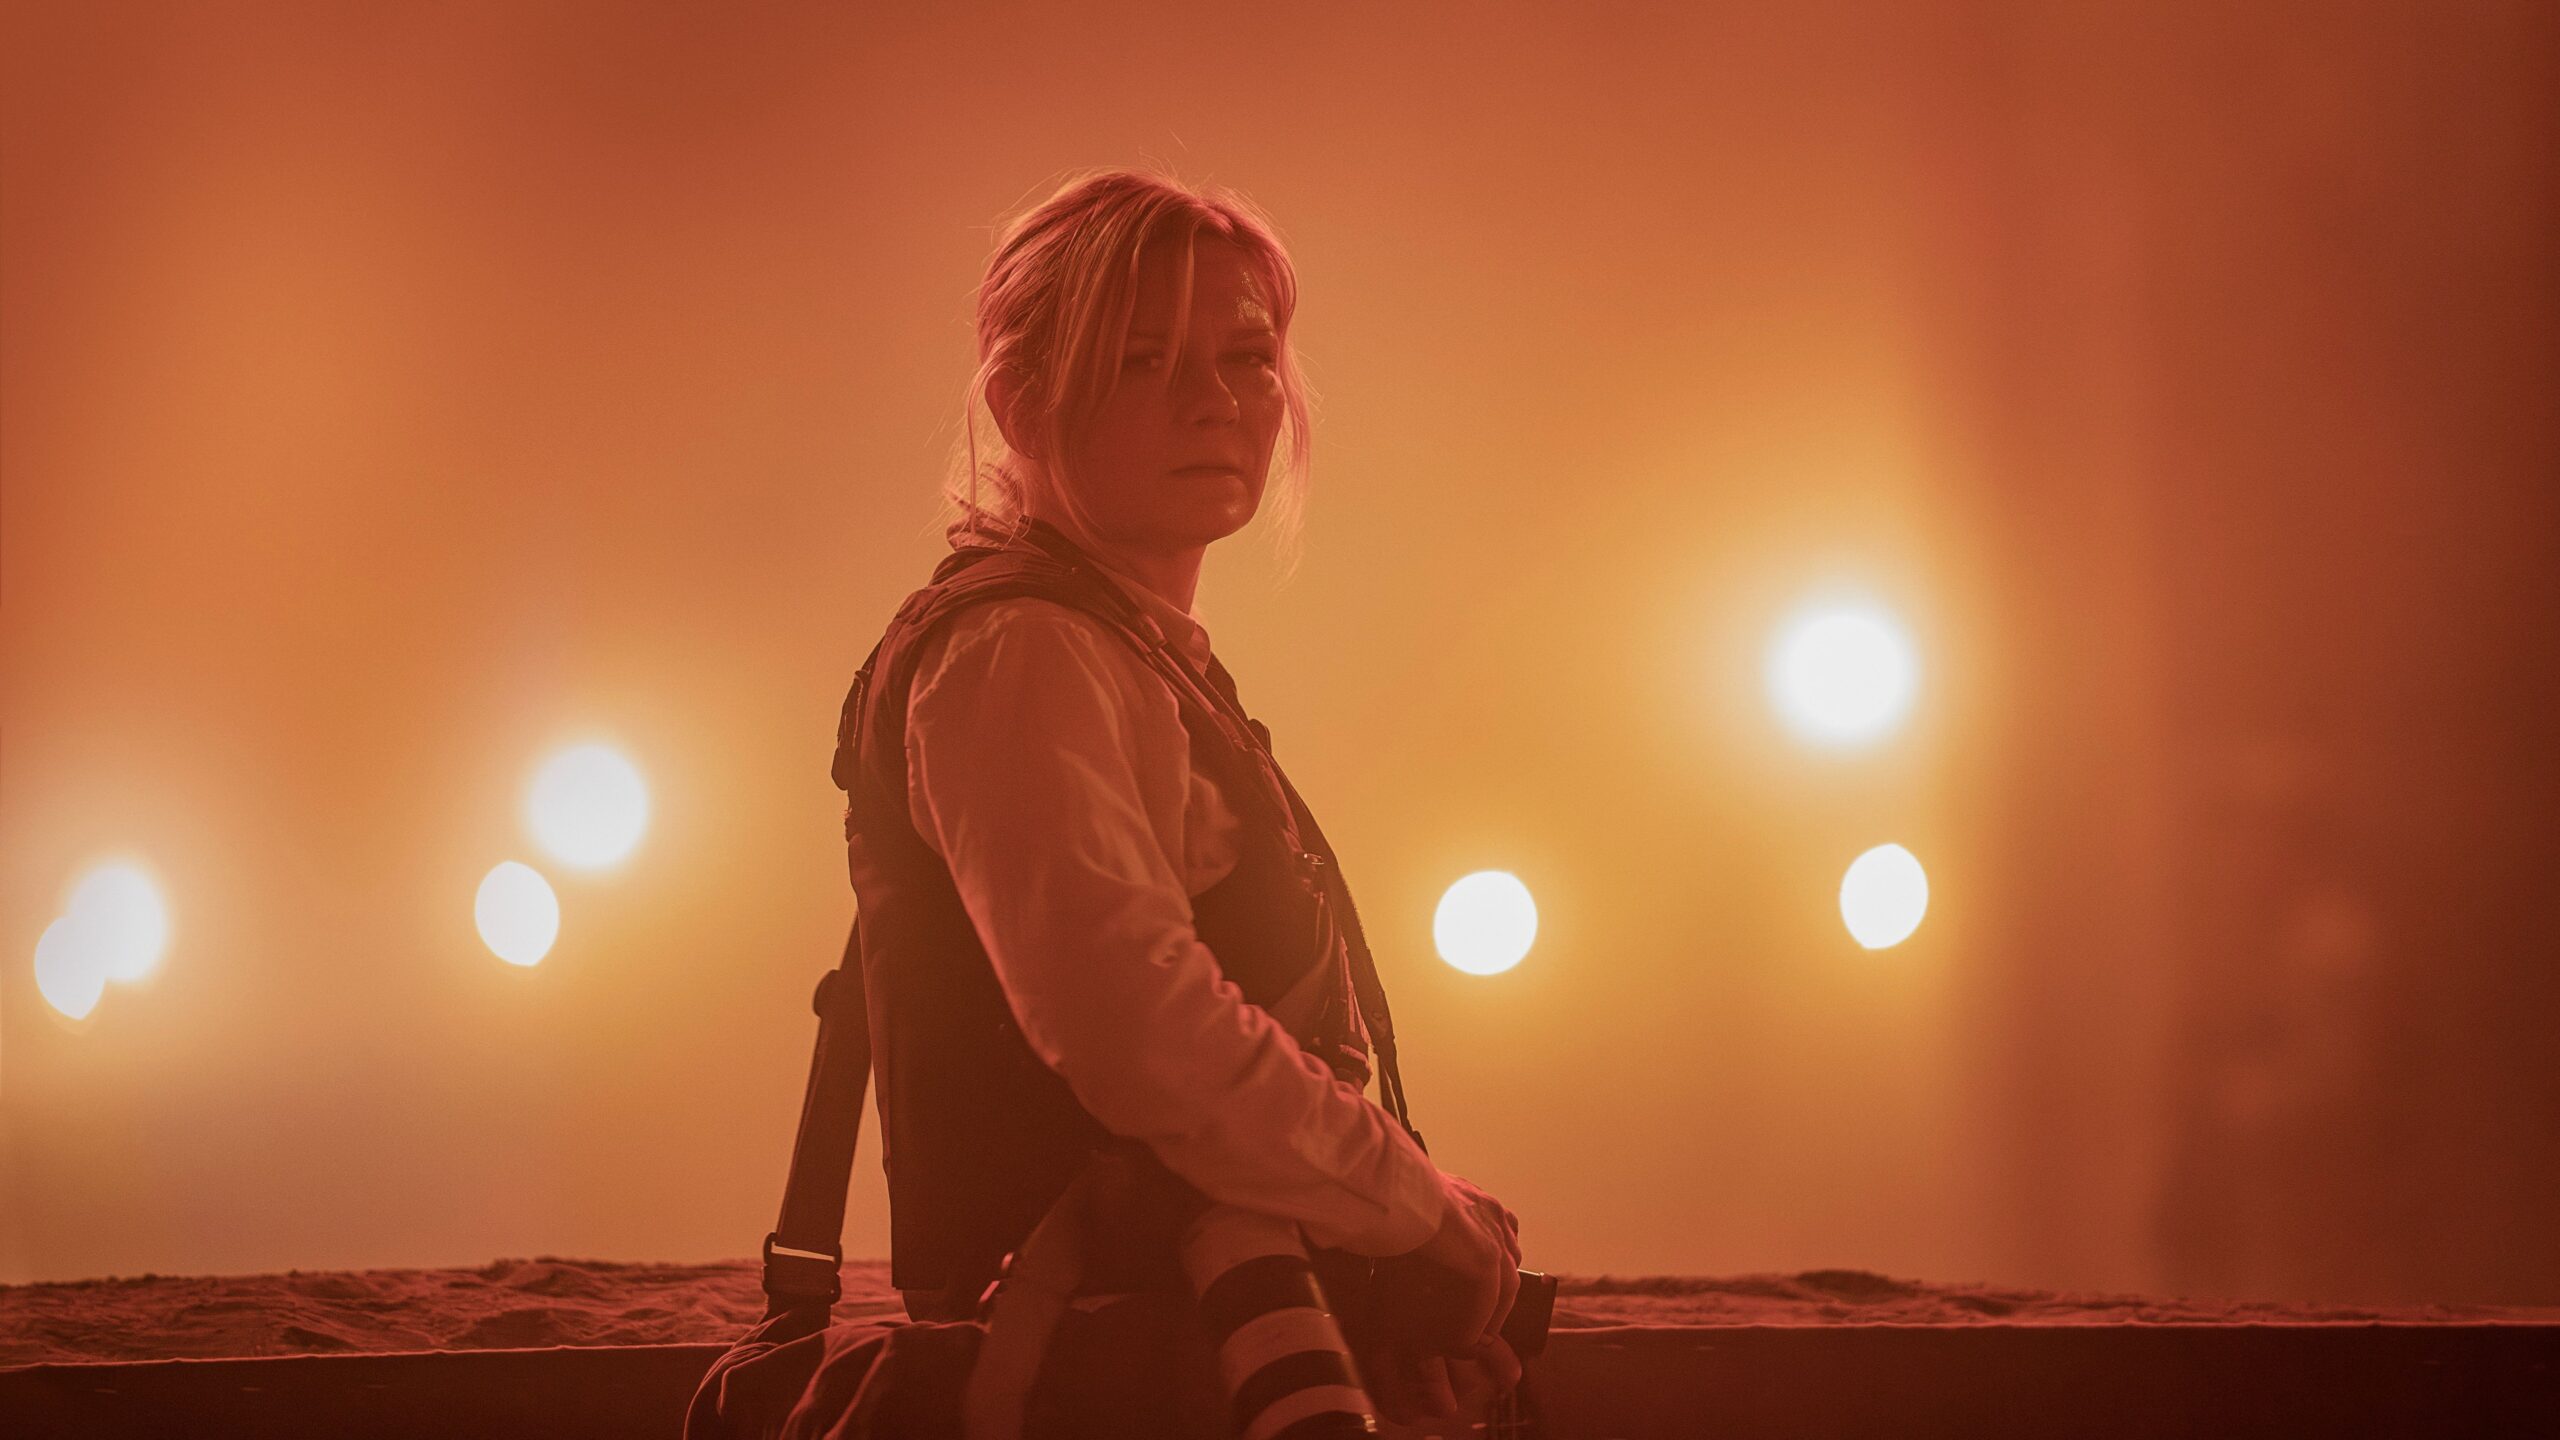 Kirstin Dunst plays a war photojournalist in 